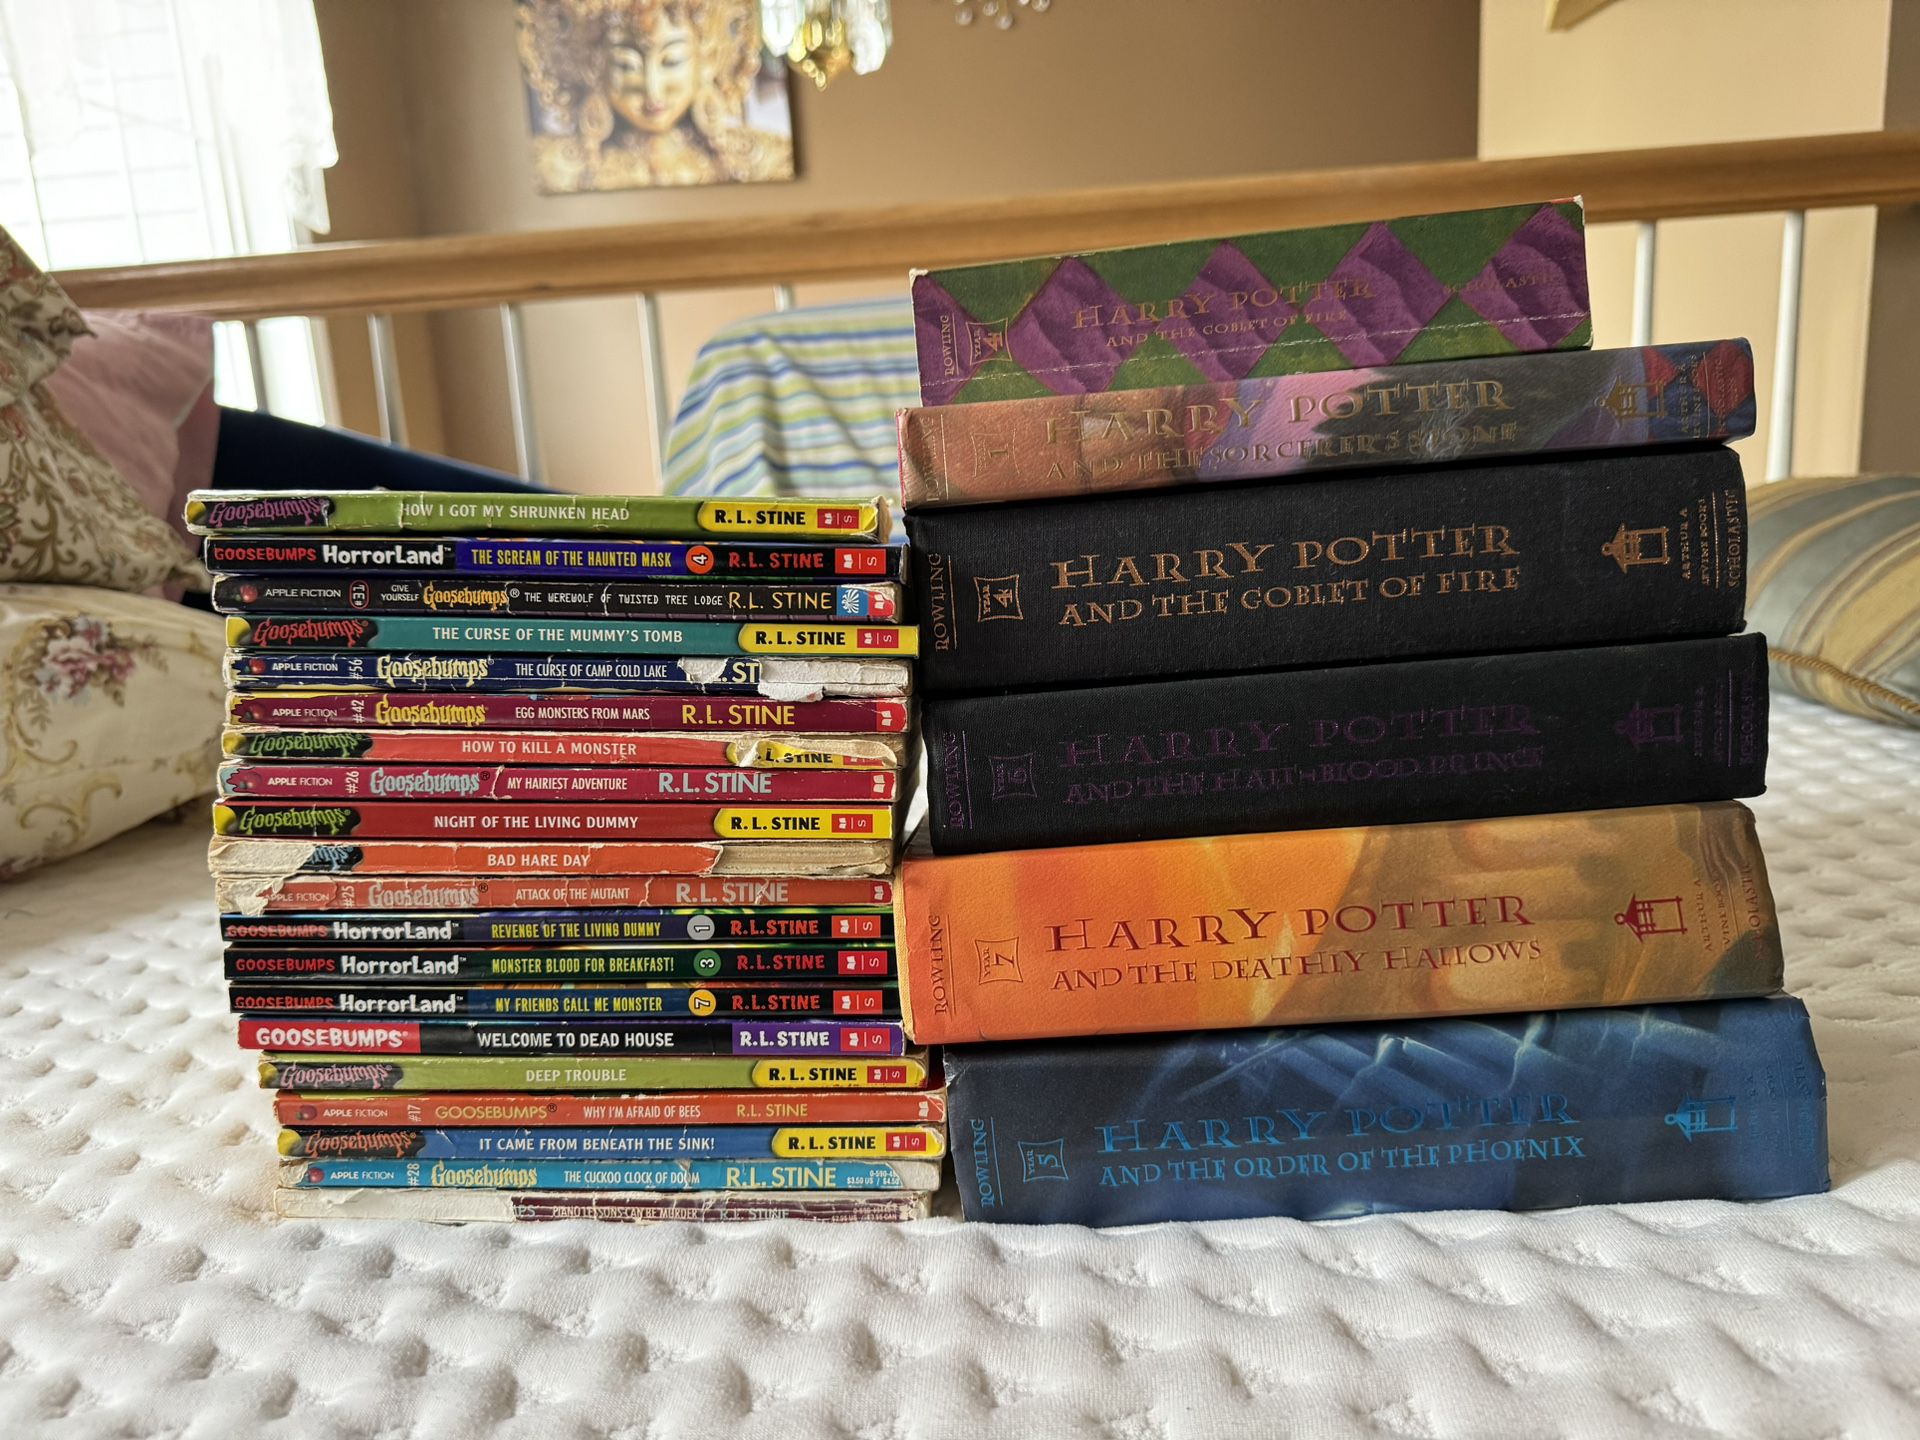 Goosebumps/ Harry Potter Book Collection 